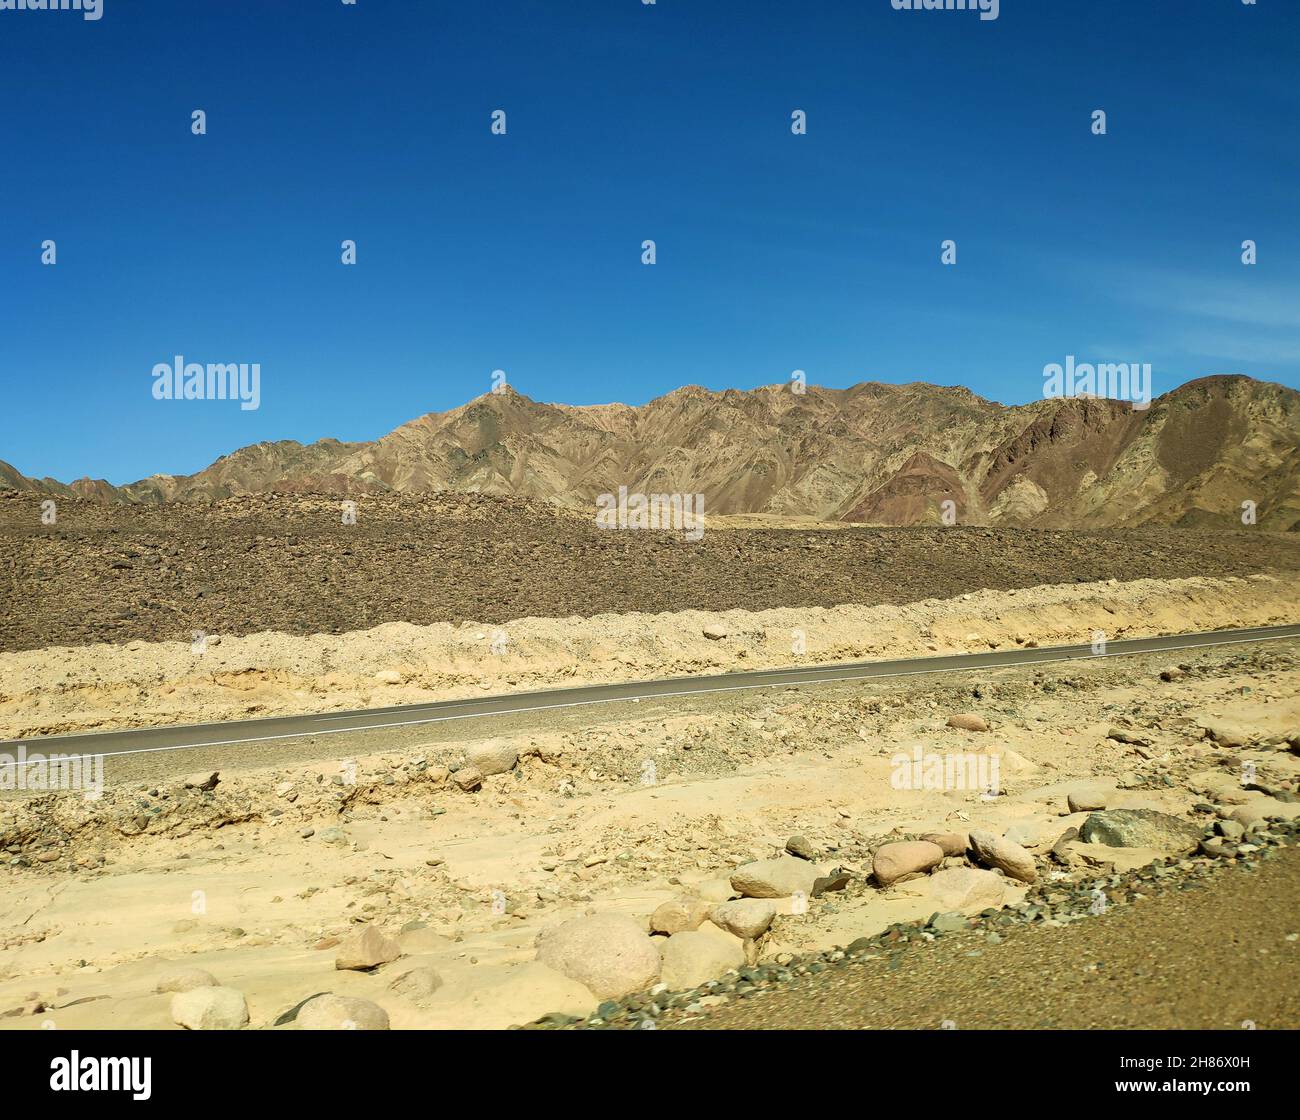 Road in the Sinai desert, picturesque background with mountains and hills, desert landscape wallpaper Stock Photo